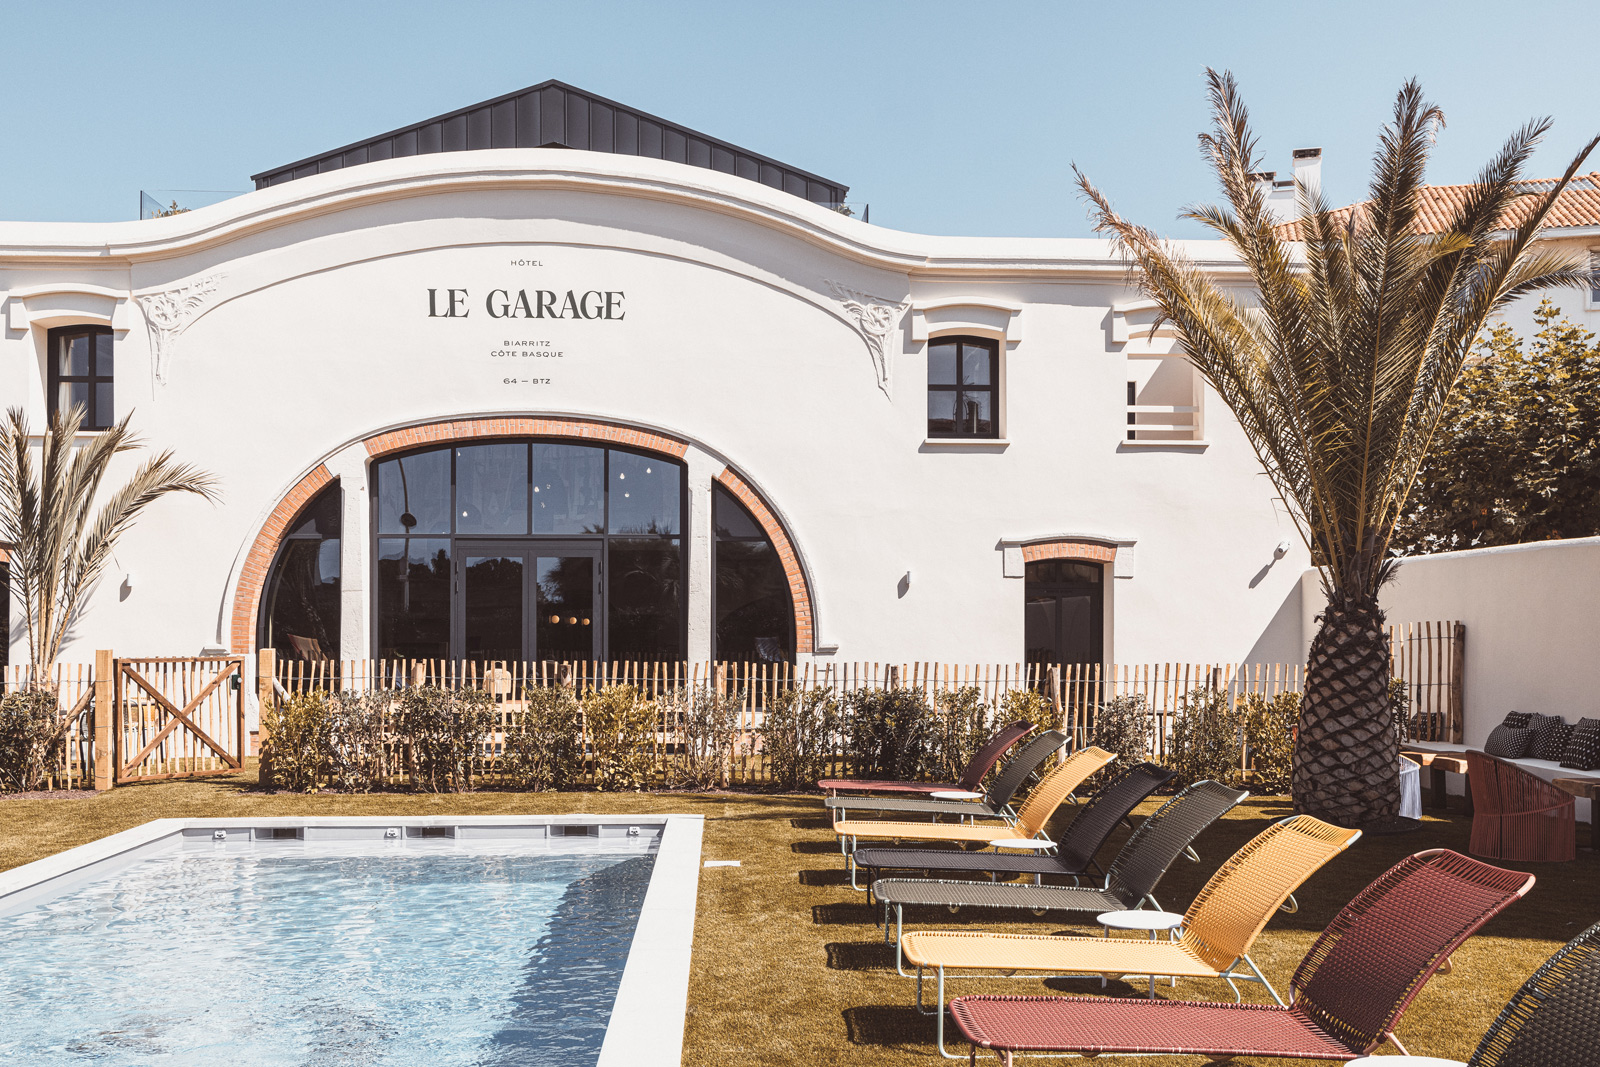 Hotel Le Garage Biarritz: Stay in an emblemati ...